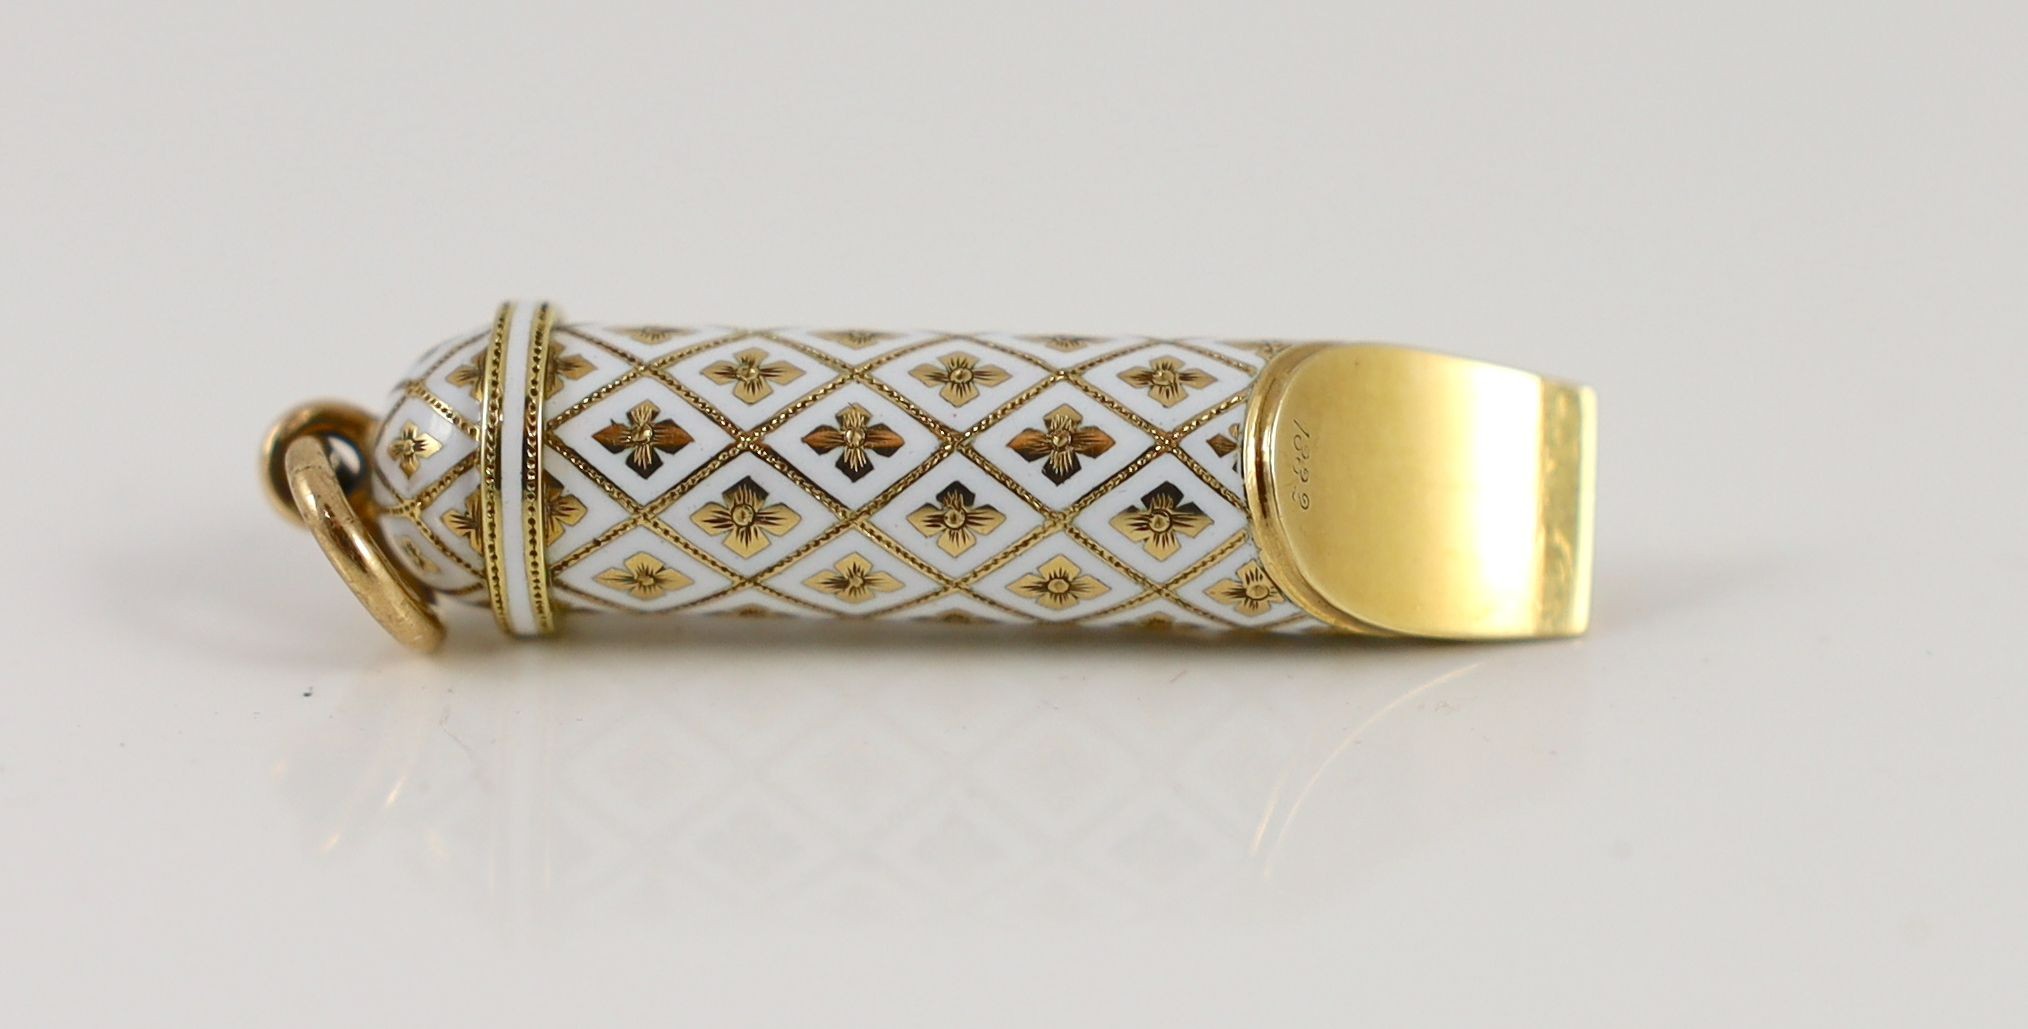 An early 20th century French 18ct gold and white enamel set novelty pendant, modelled as a whistle